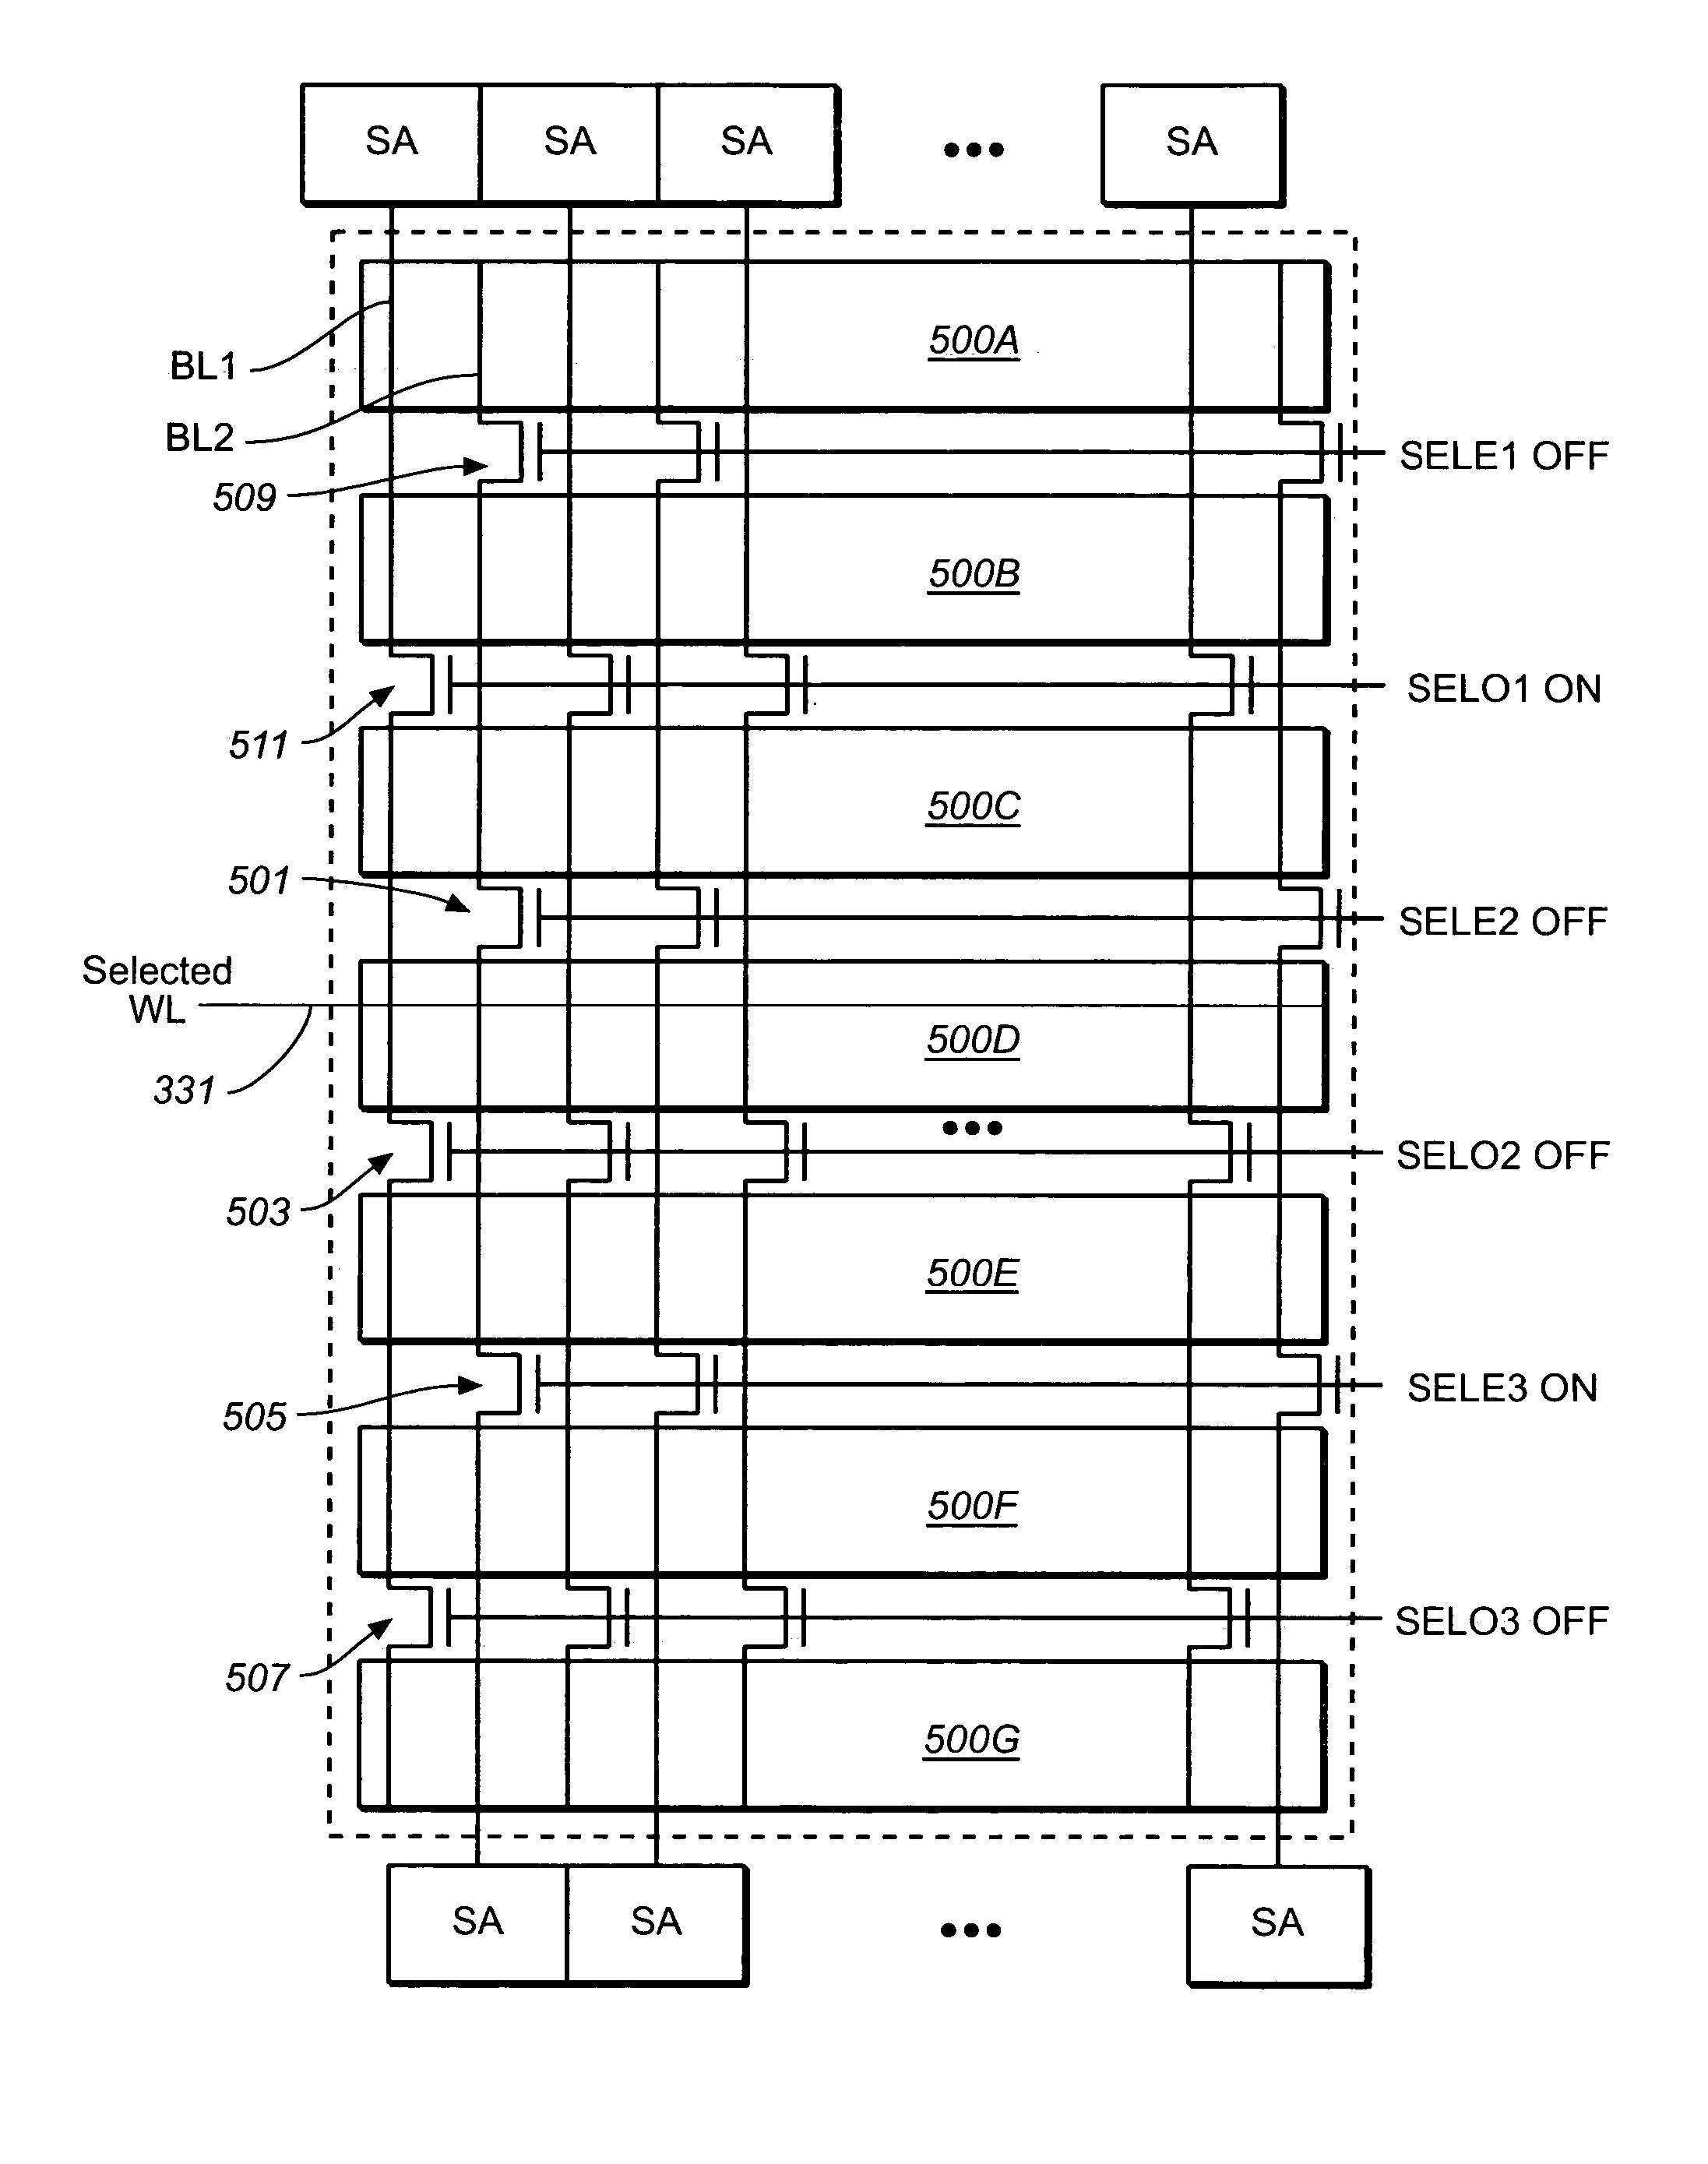 Partition of non-volatile memory array to reduce bit line capacitance